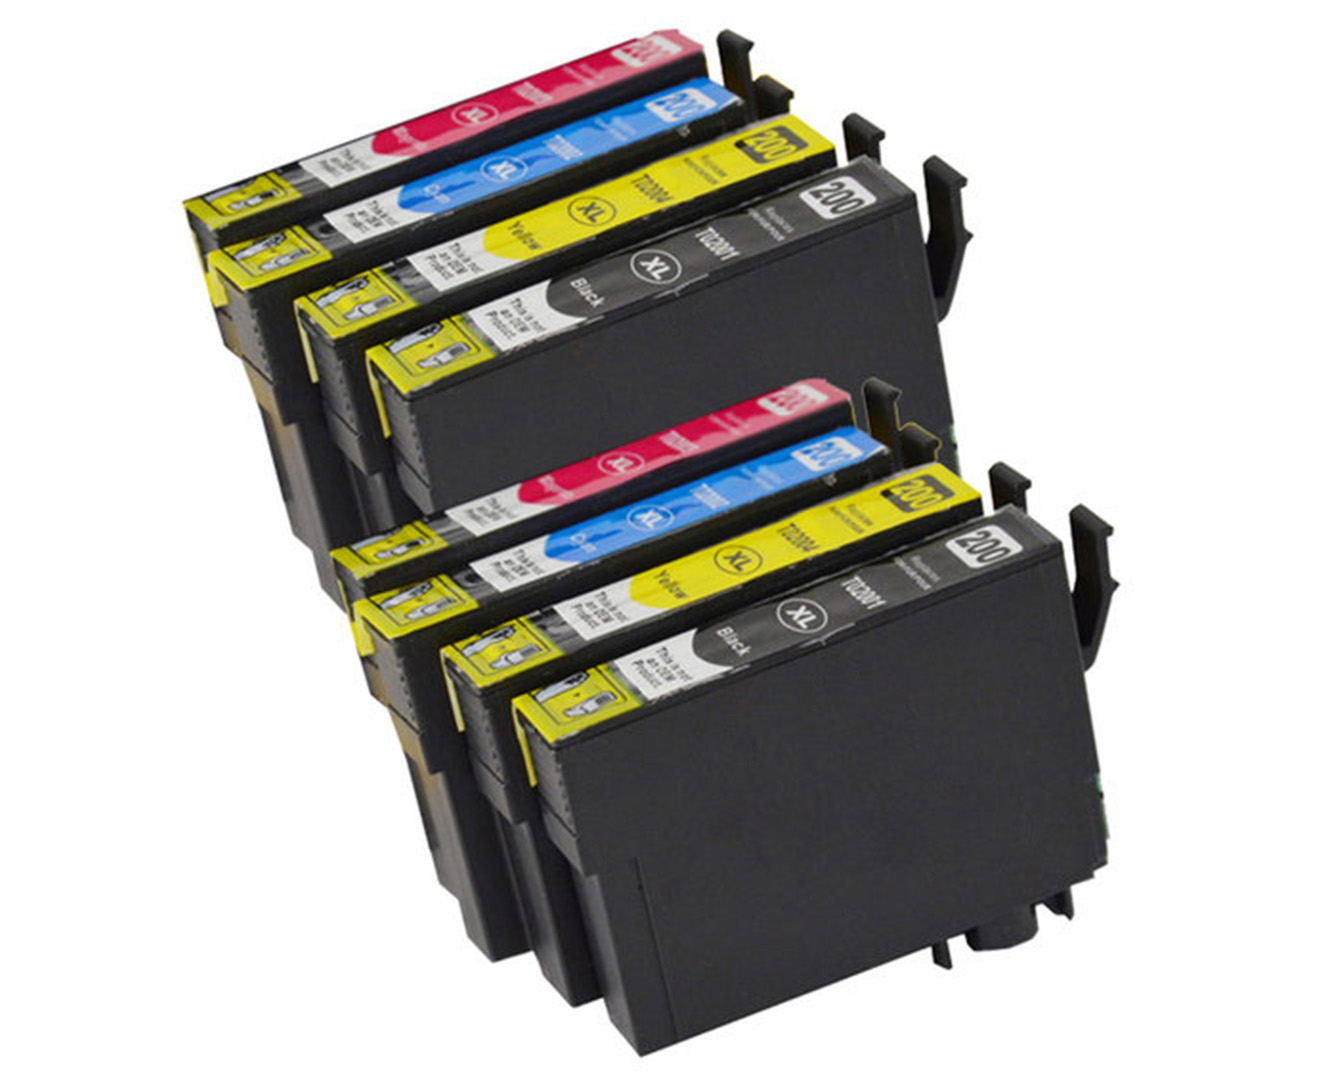 Pro Colour 200XL Inkjet Cartridge For Epson Printers - Assorted 8-Pack